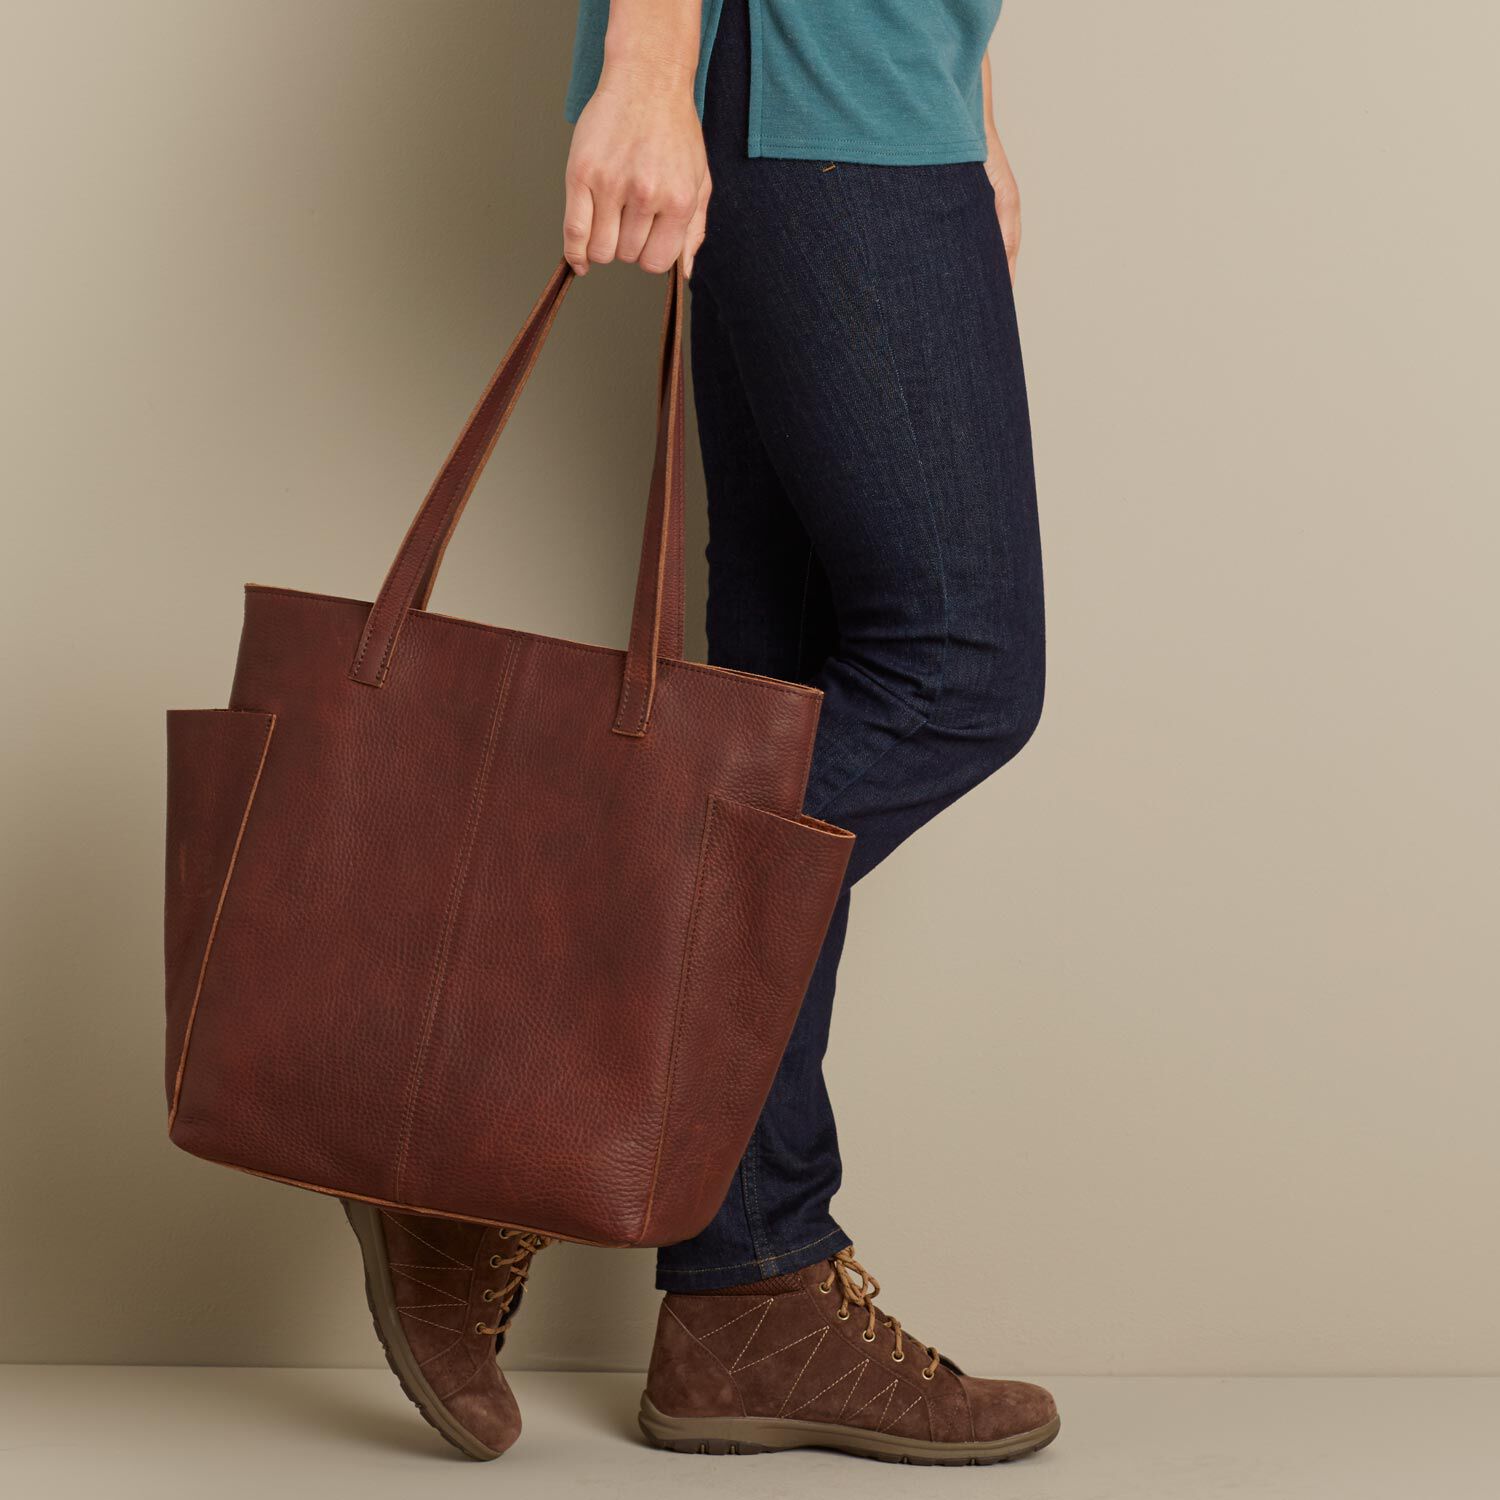 My Favorite Lifetime Leather Tote Bag